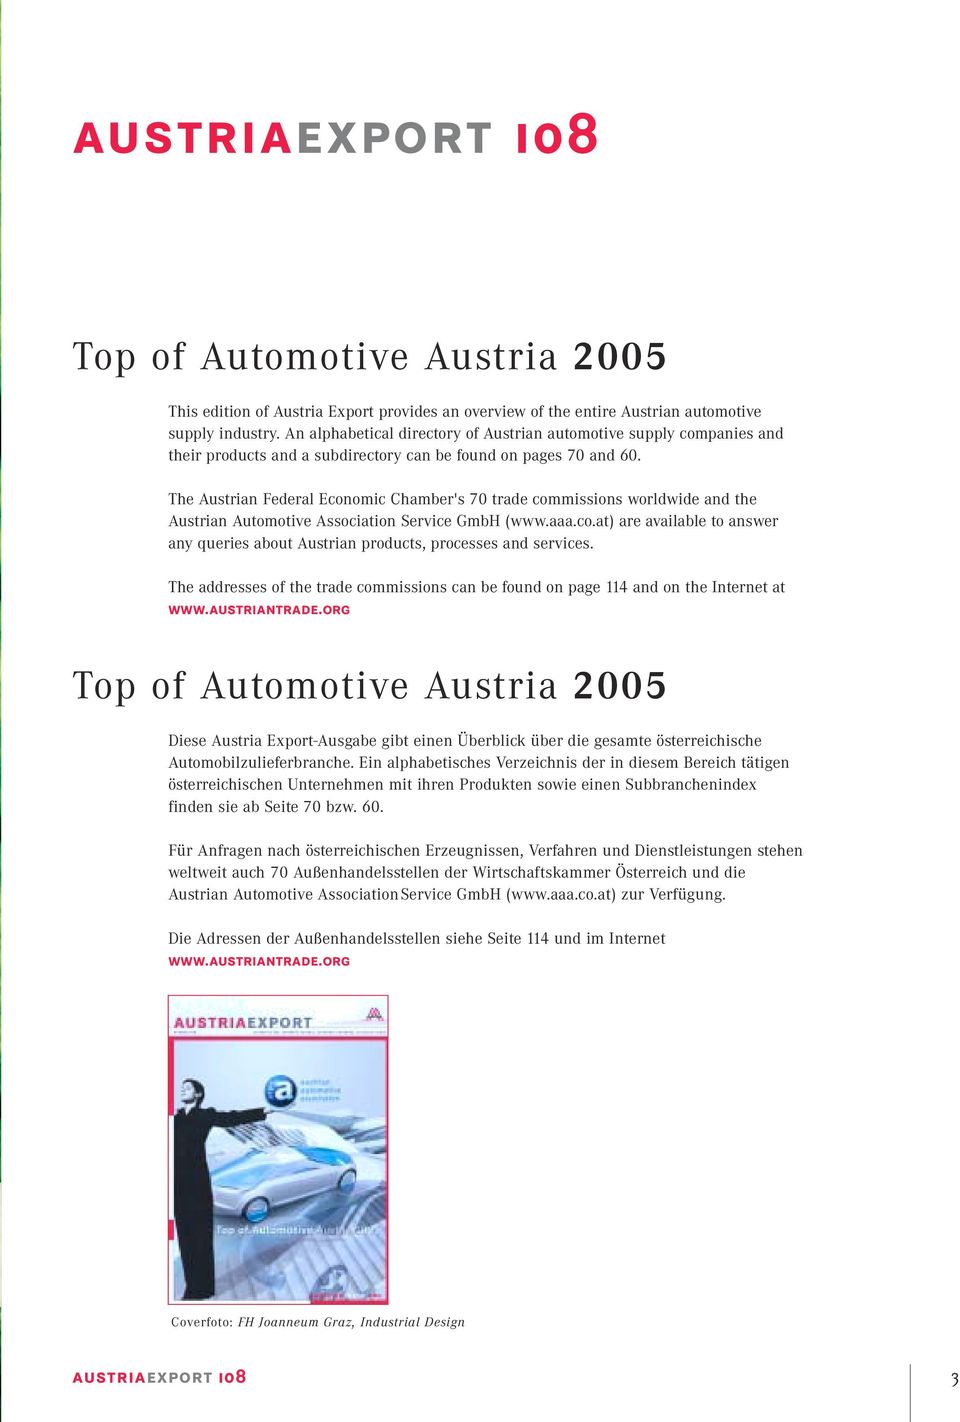 The Austrian Federal Economic Chamber's 70 trade commissions worldwide and the Austrian Automotive Association Service (www.aaa.co.at) are available to answer any queries about Austrian products, processes and services.